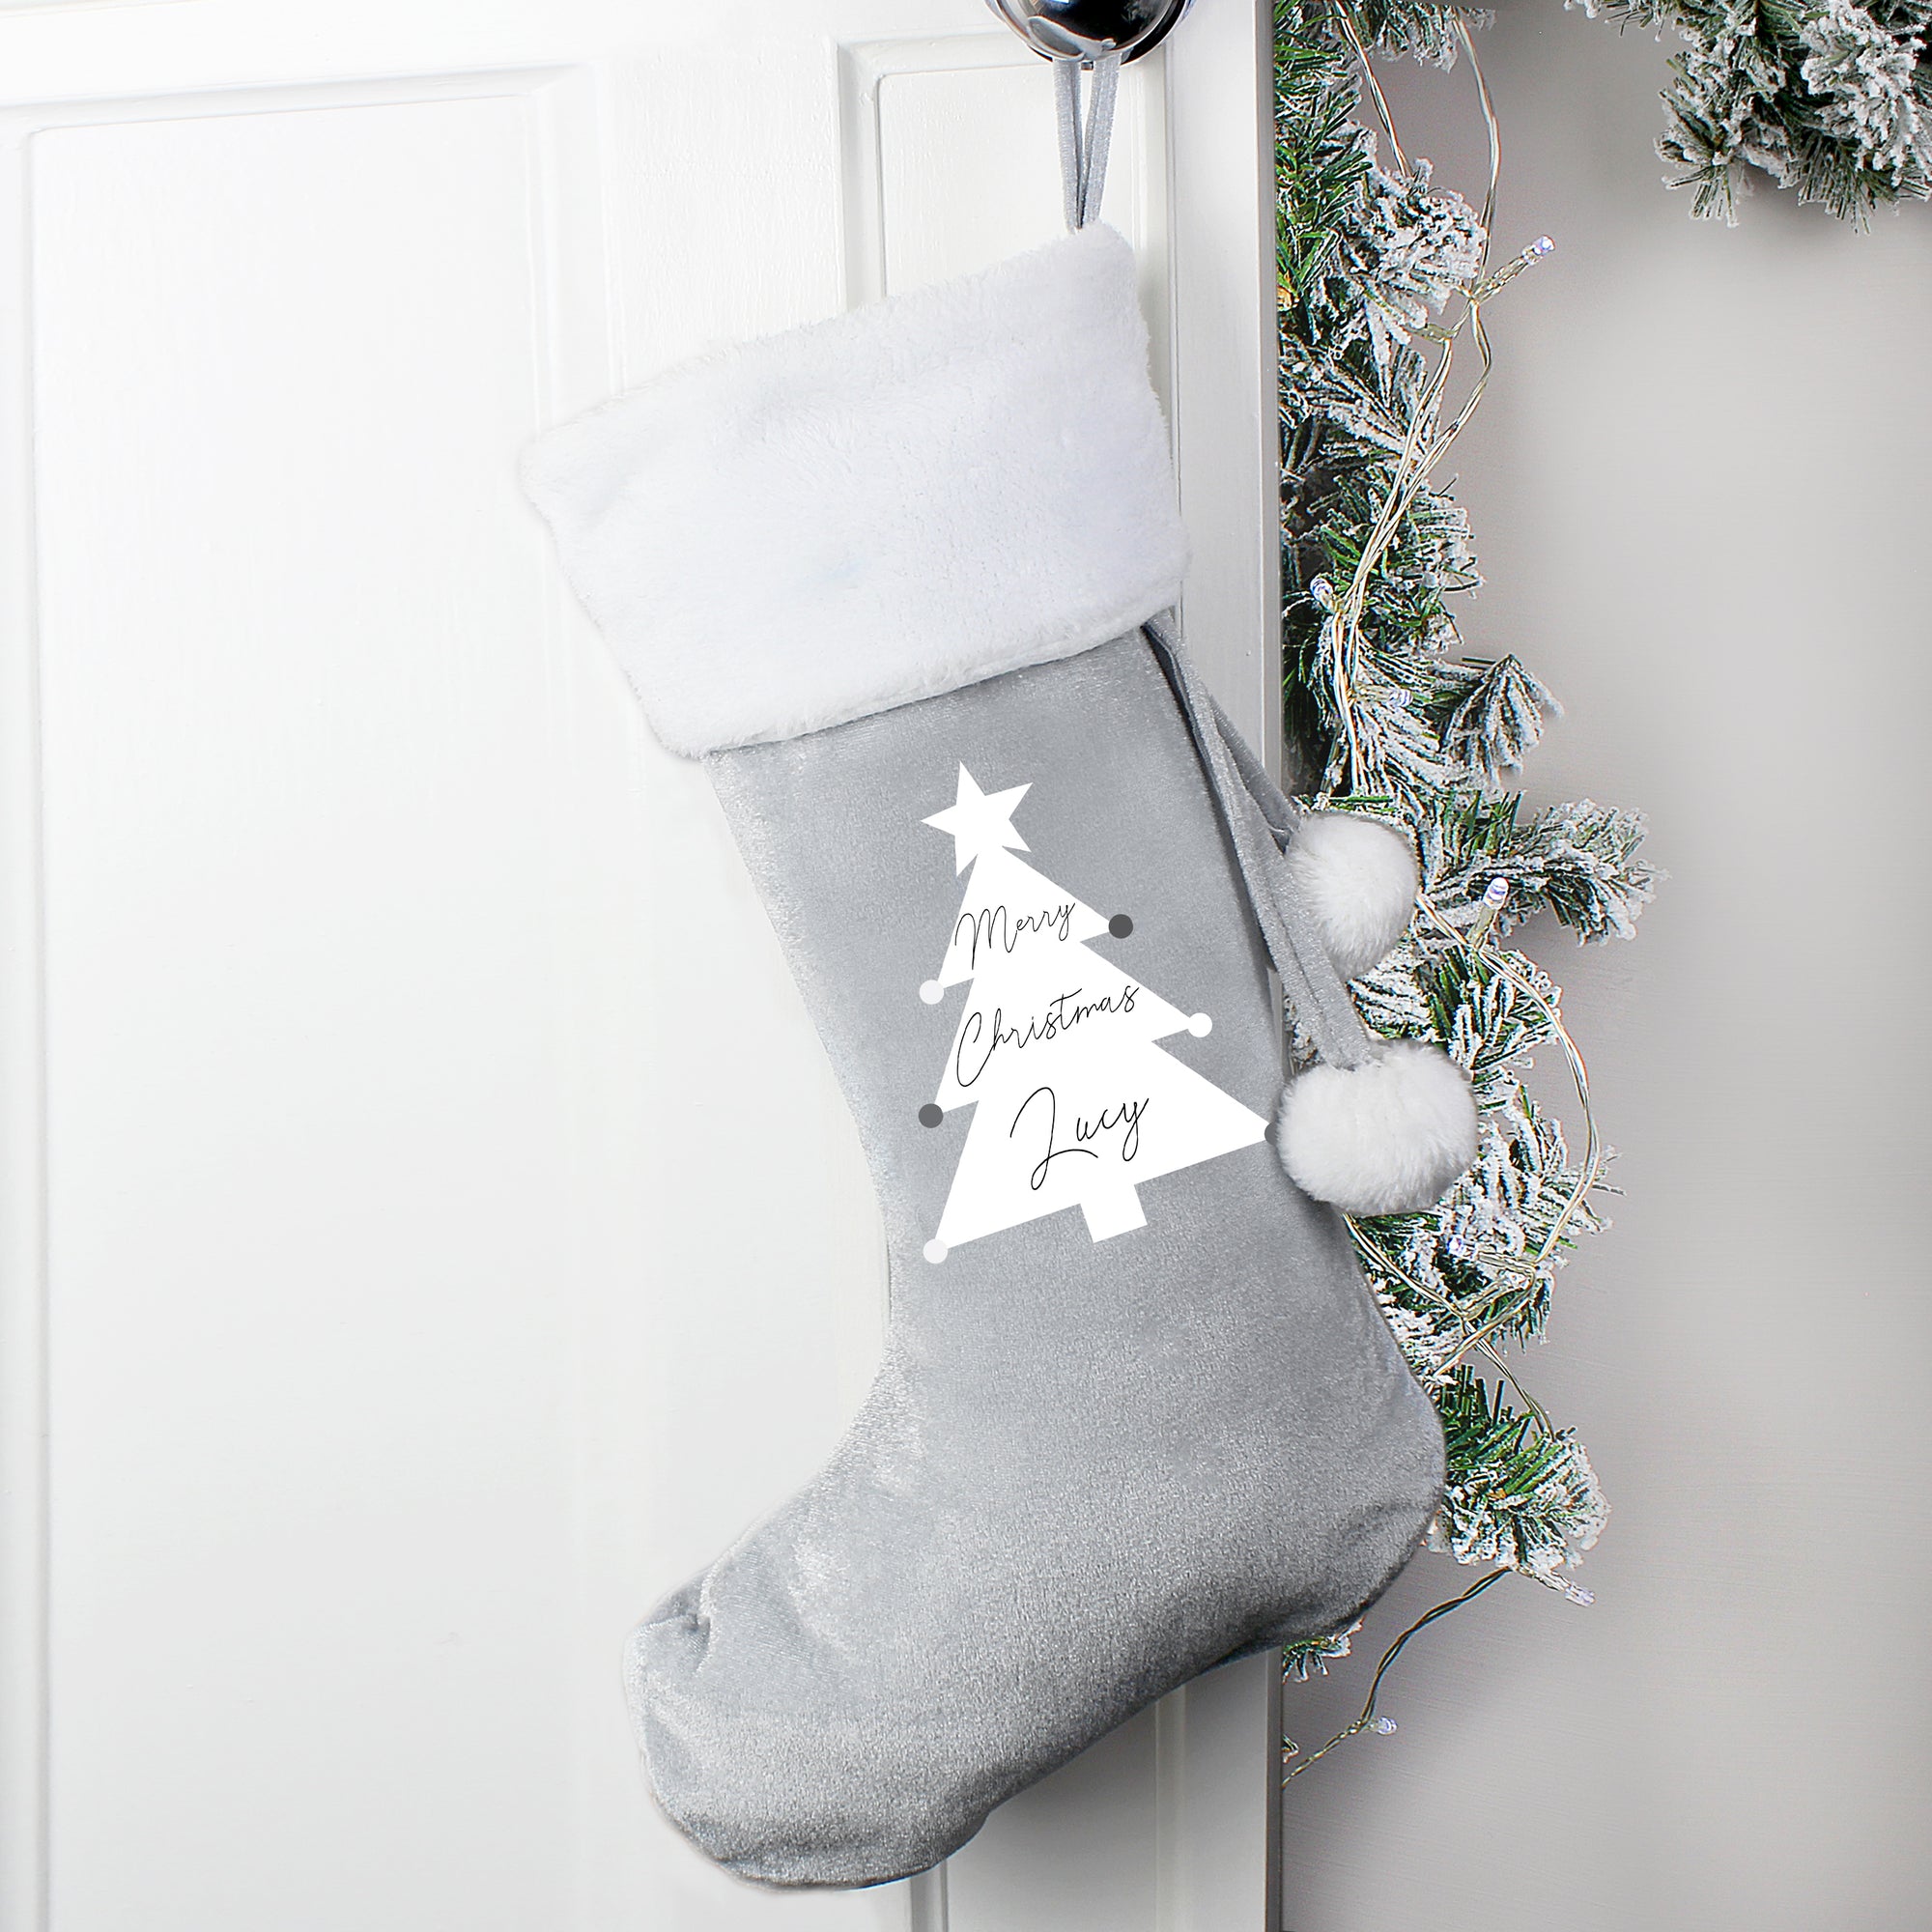 Personalised silver velvet Christmas stocking with a white plush trim and a loop to hang it from. The front of the stocking features an image of a white Christmas tree and the wording 'Merry Christmas' printed inside the tree in a black modern cursive font. You can then add a name of your choice which will be printed directly below the wording in the same black font.